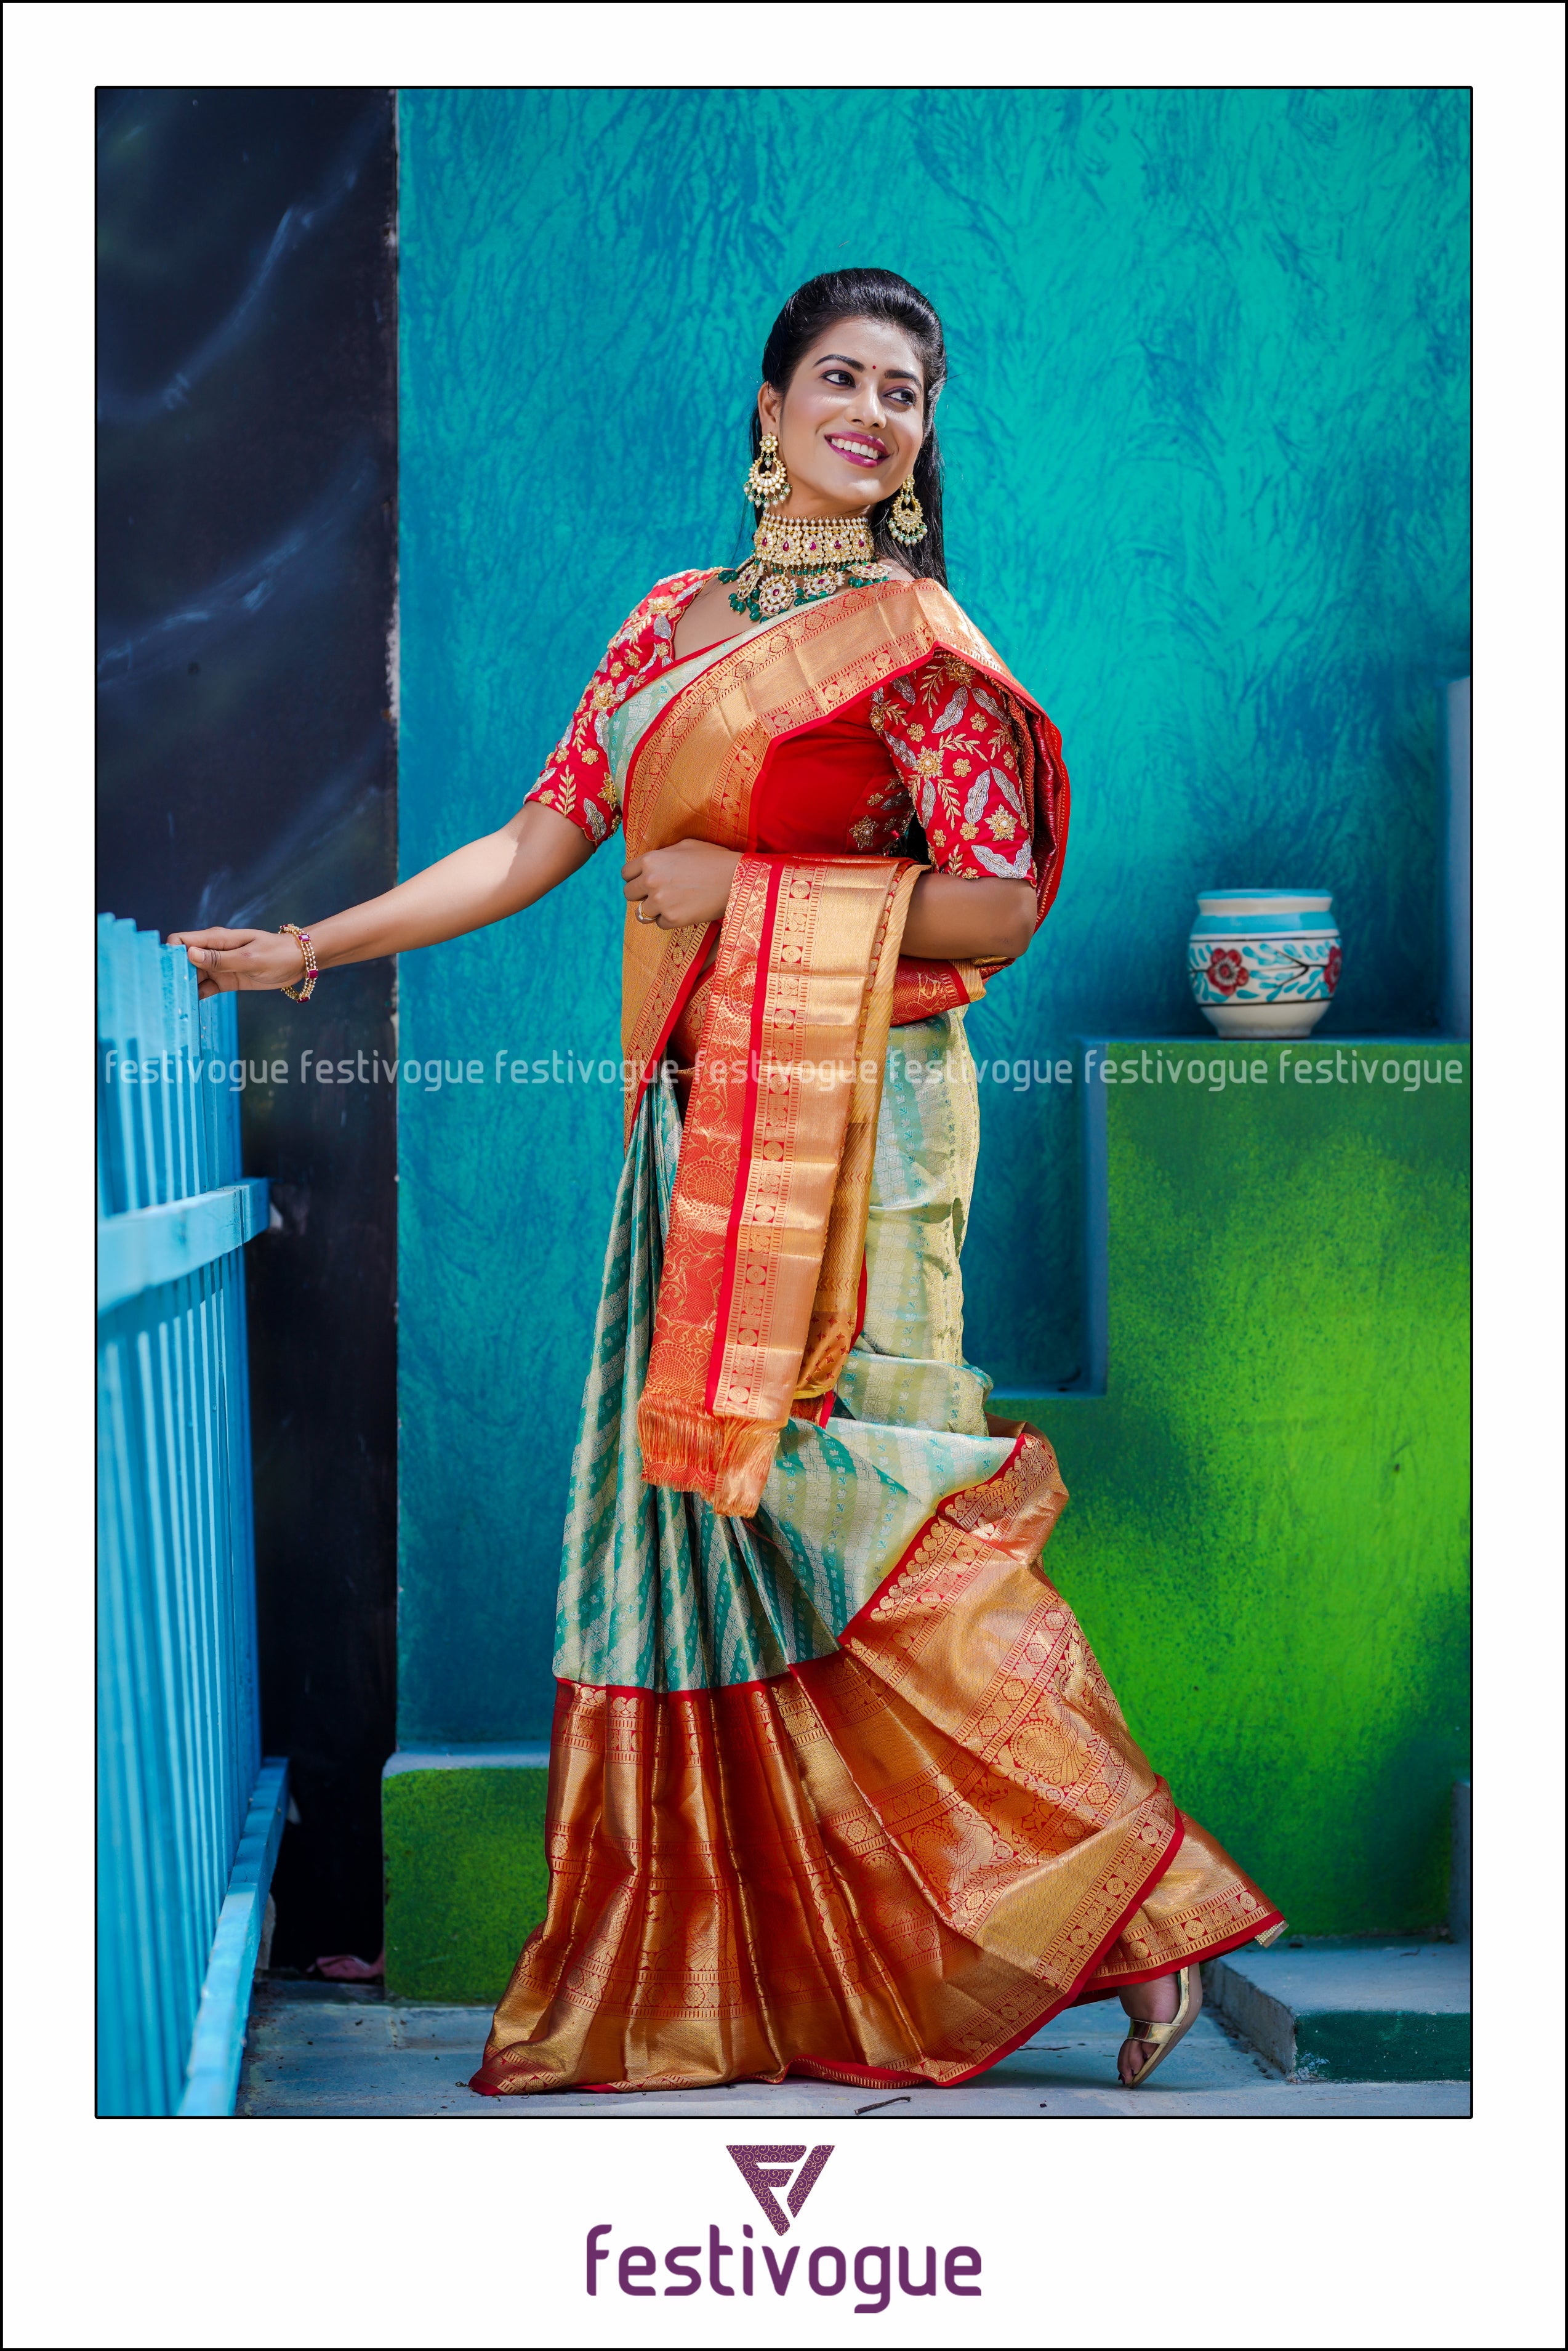 Teal and Red Stripes Patterned Kanchipattu Saree